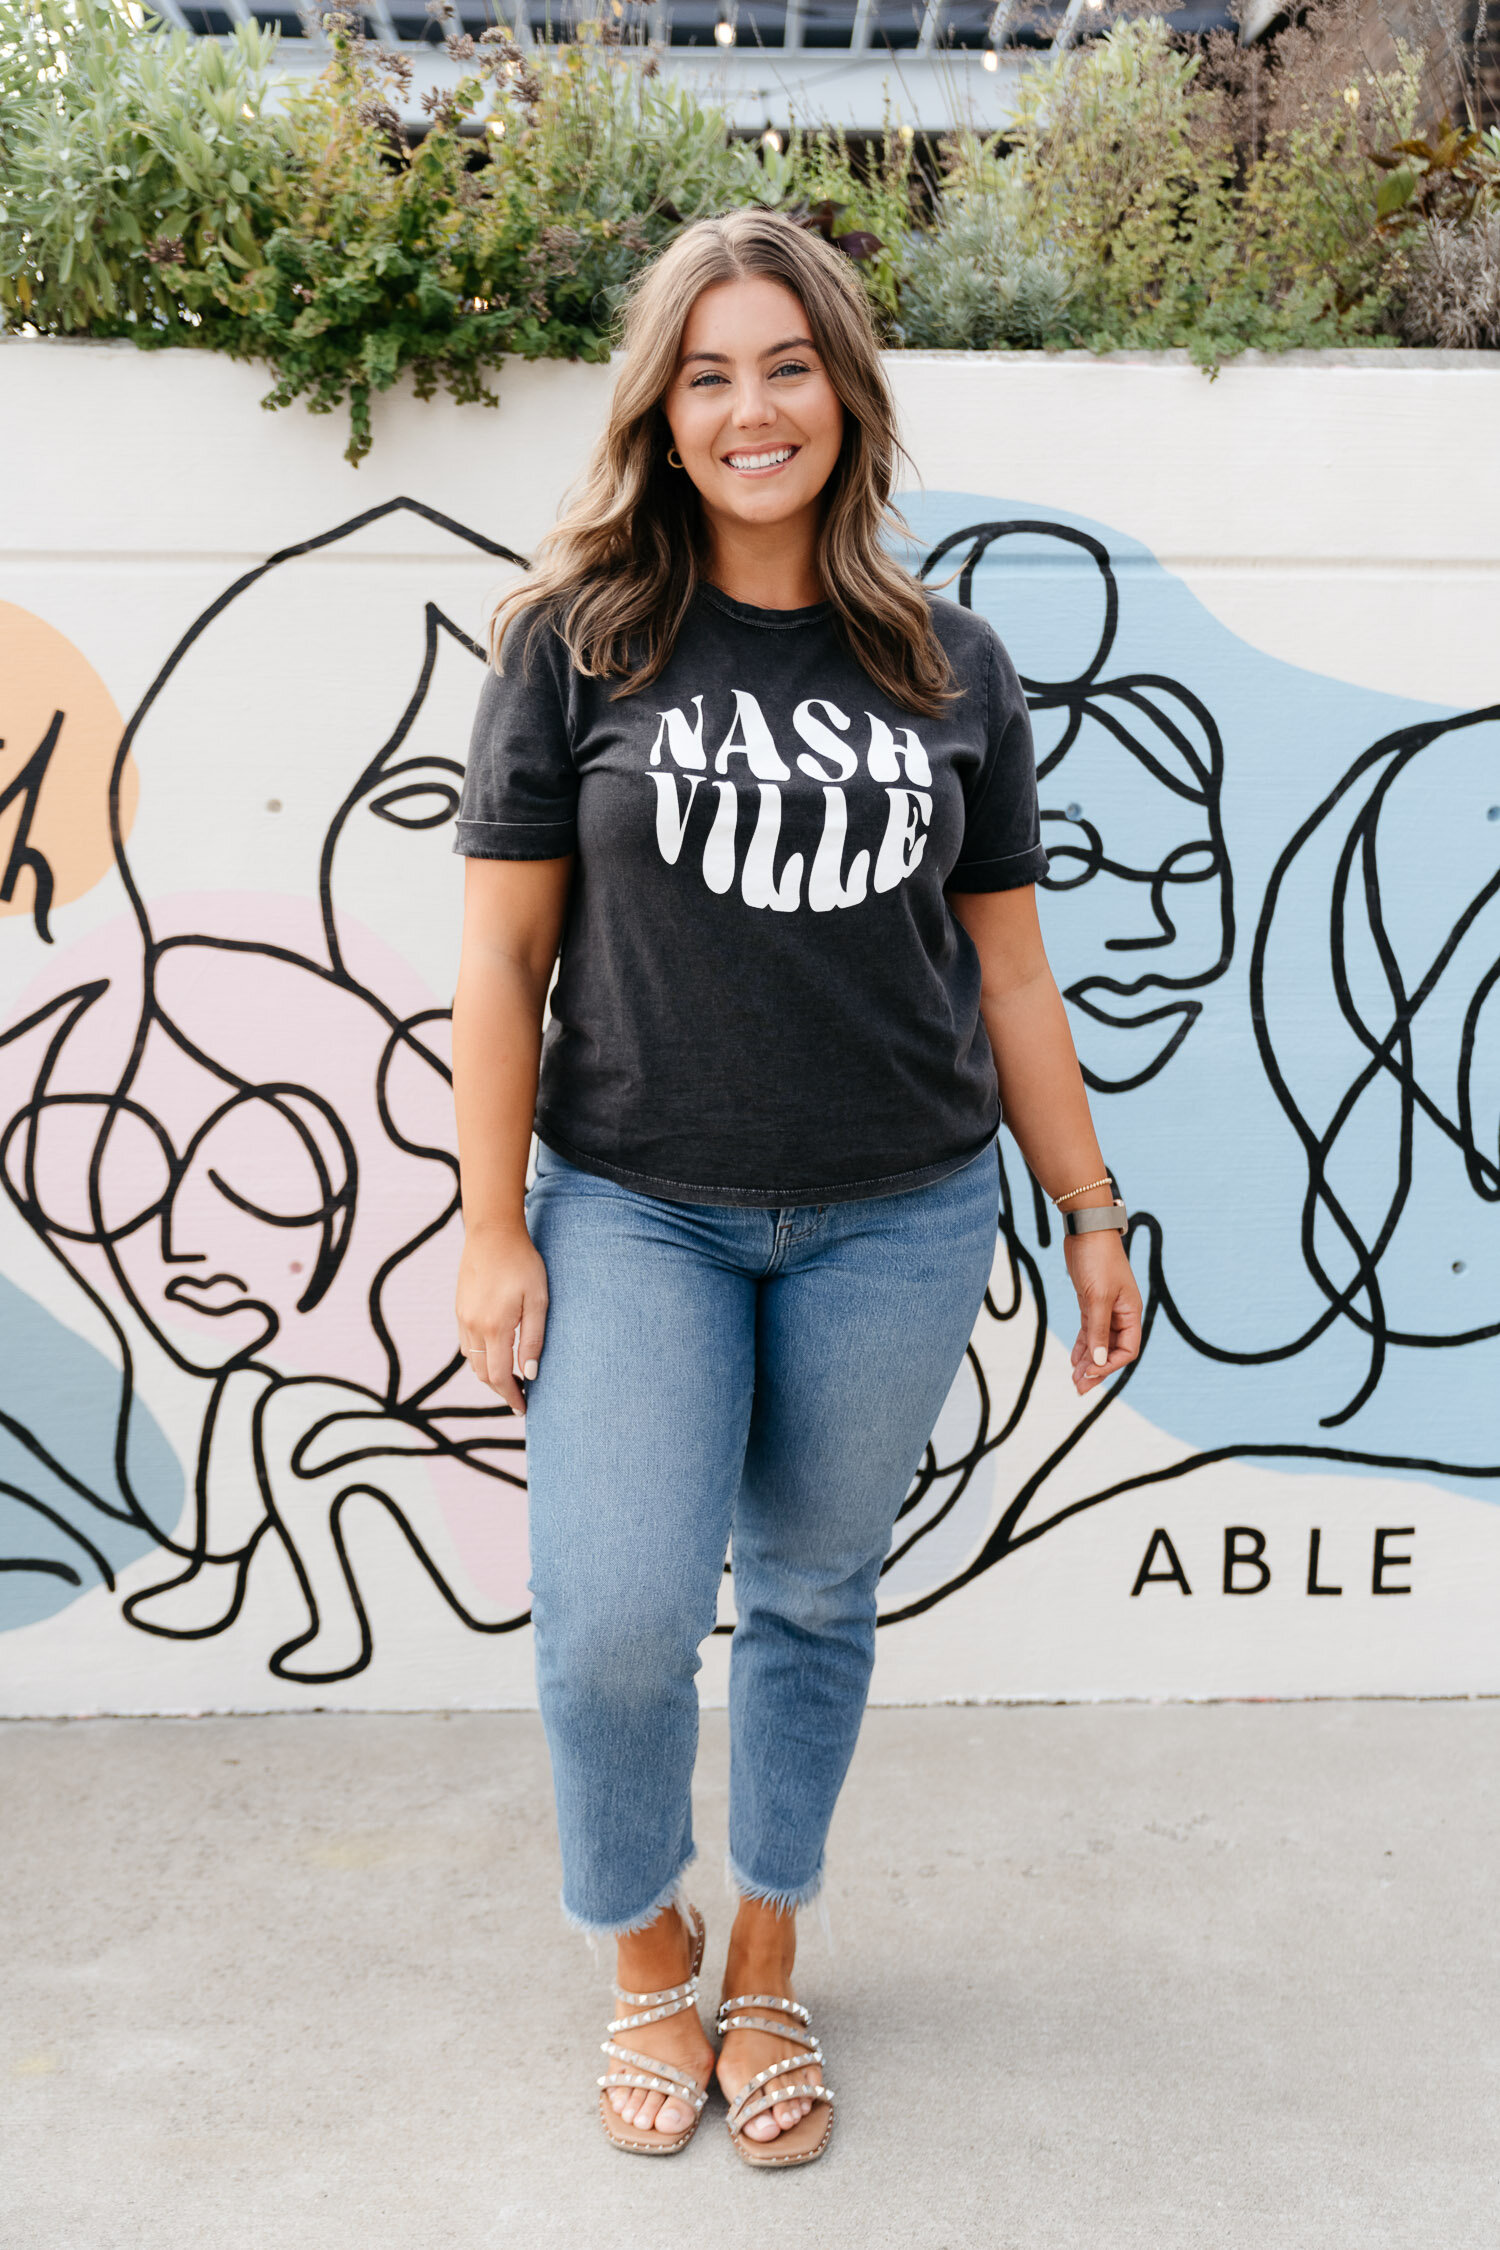 Our Recent Trip With ABLE to Nashville — Caralyn Mirand Koch